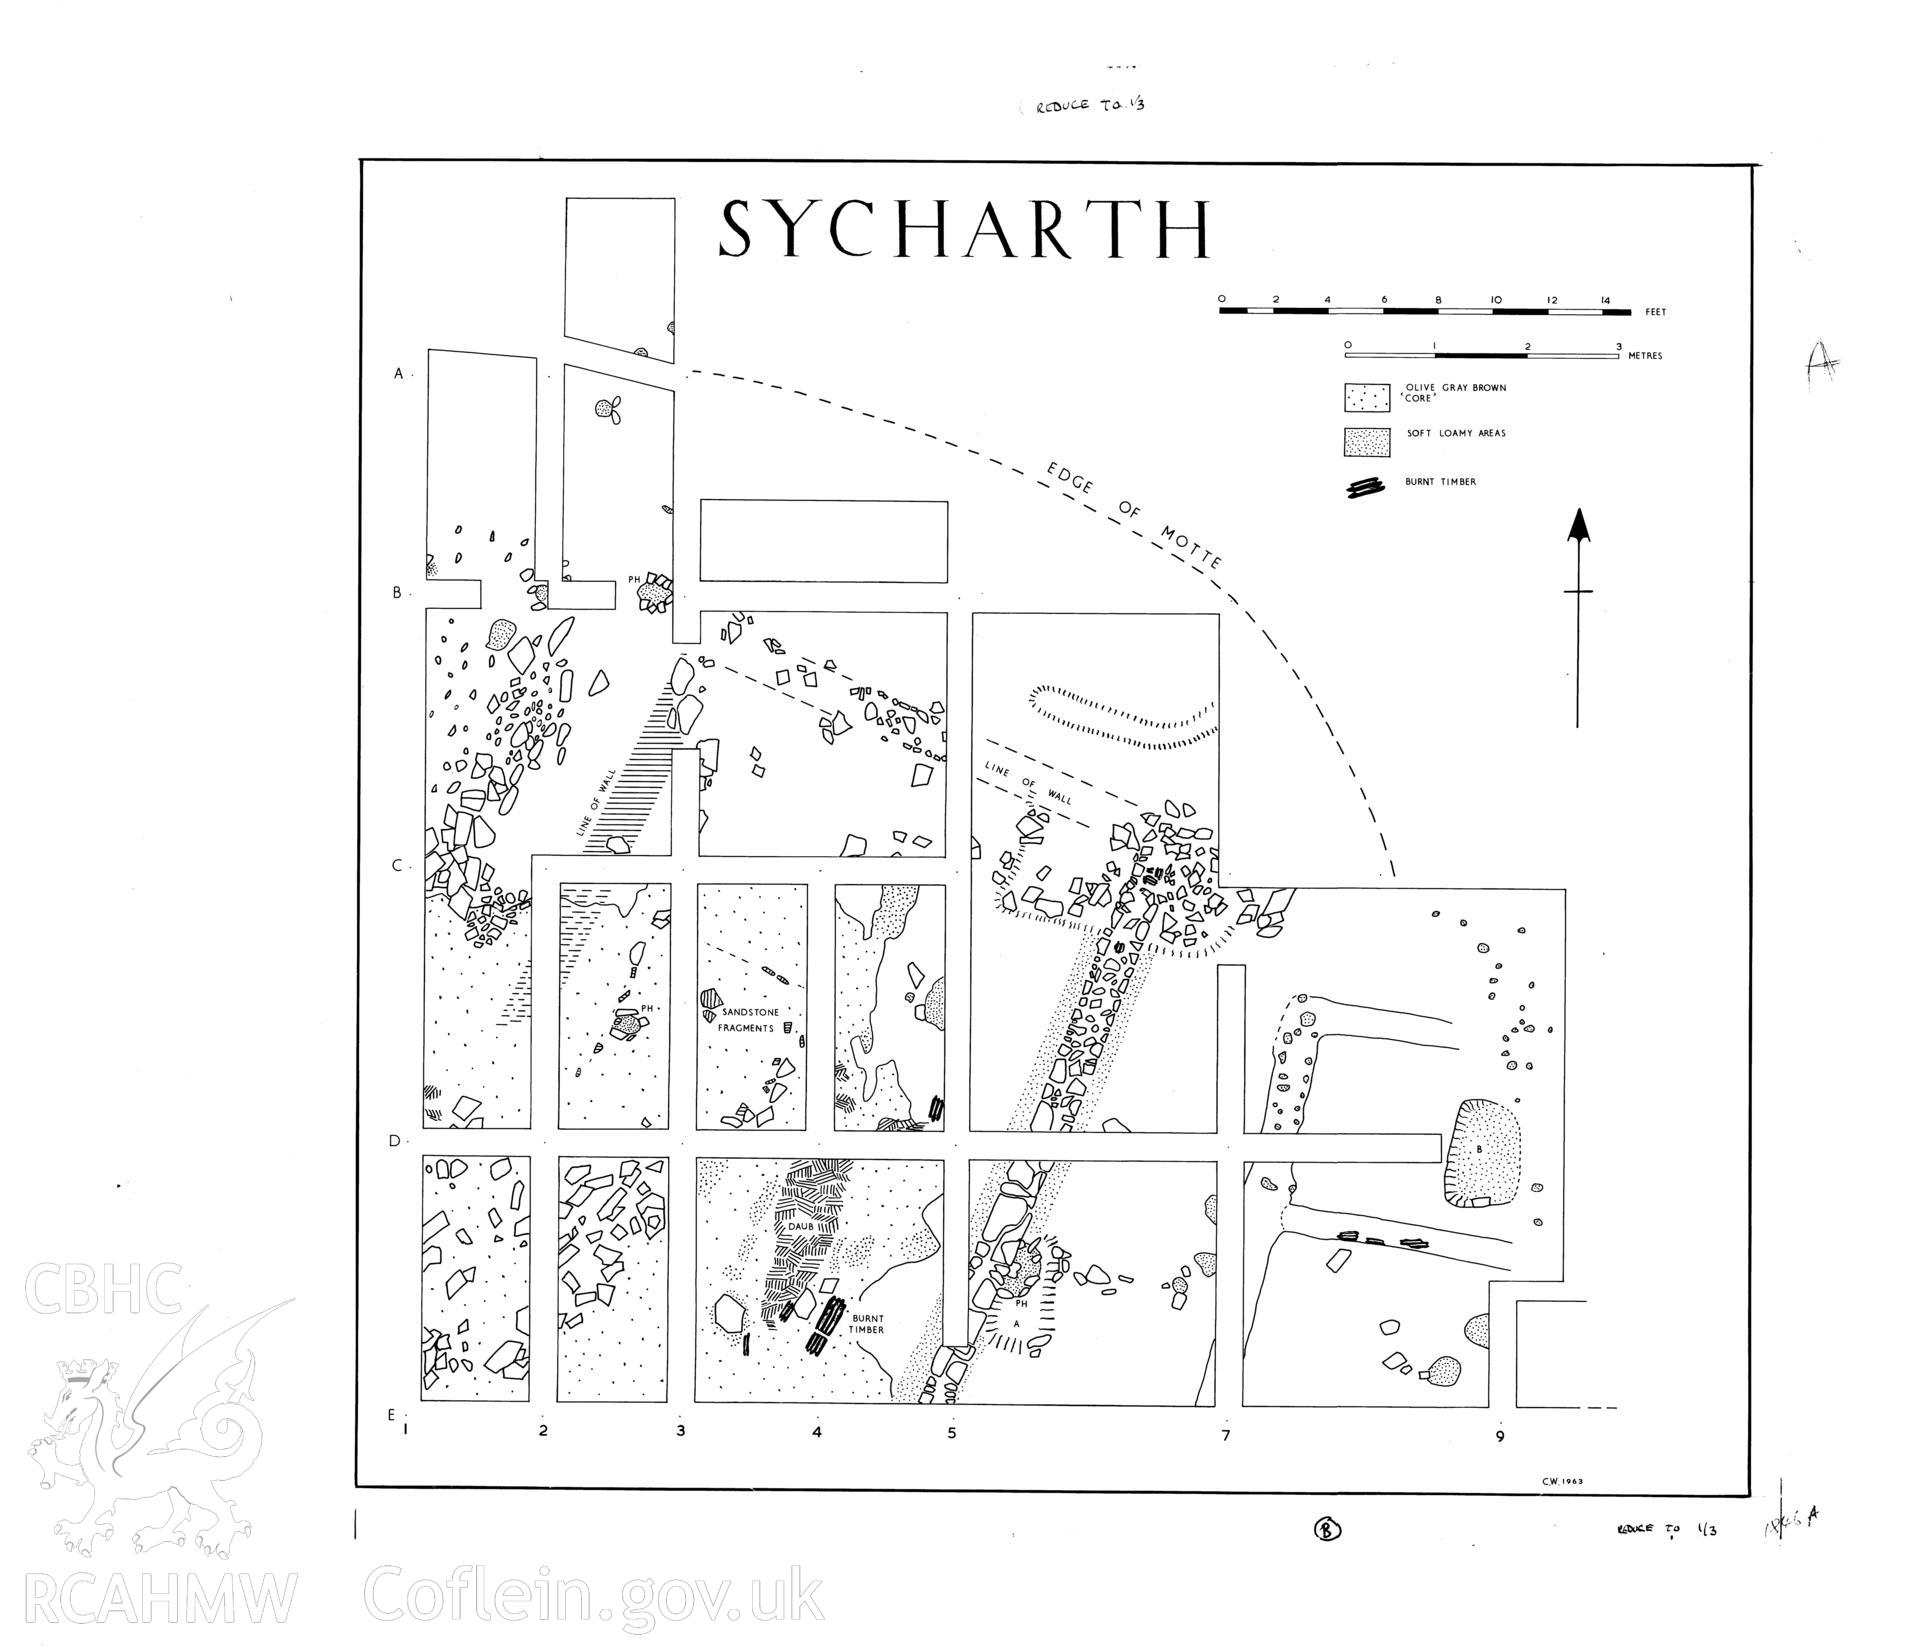 Sycharth Castle, Llansilin; ink drawing by Douglas Hague showing plan of the structure on top of the motte, produced following excavations of 1962-63 and published in Archaeologia Cambrensis Vol CXV, 1966, fig 4.